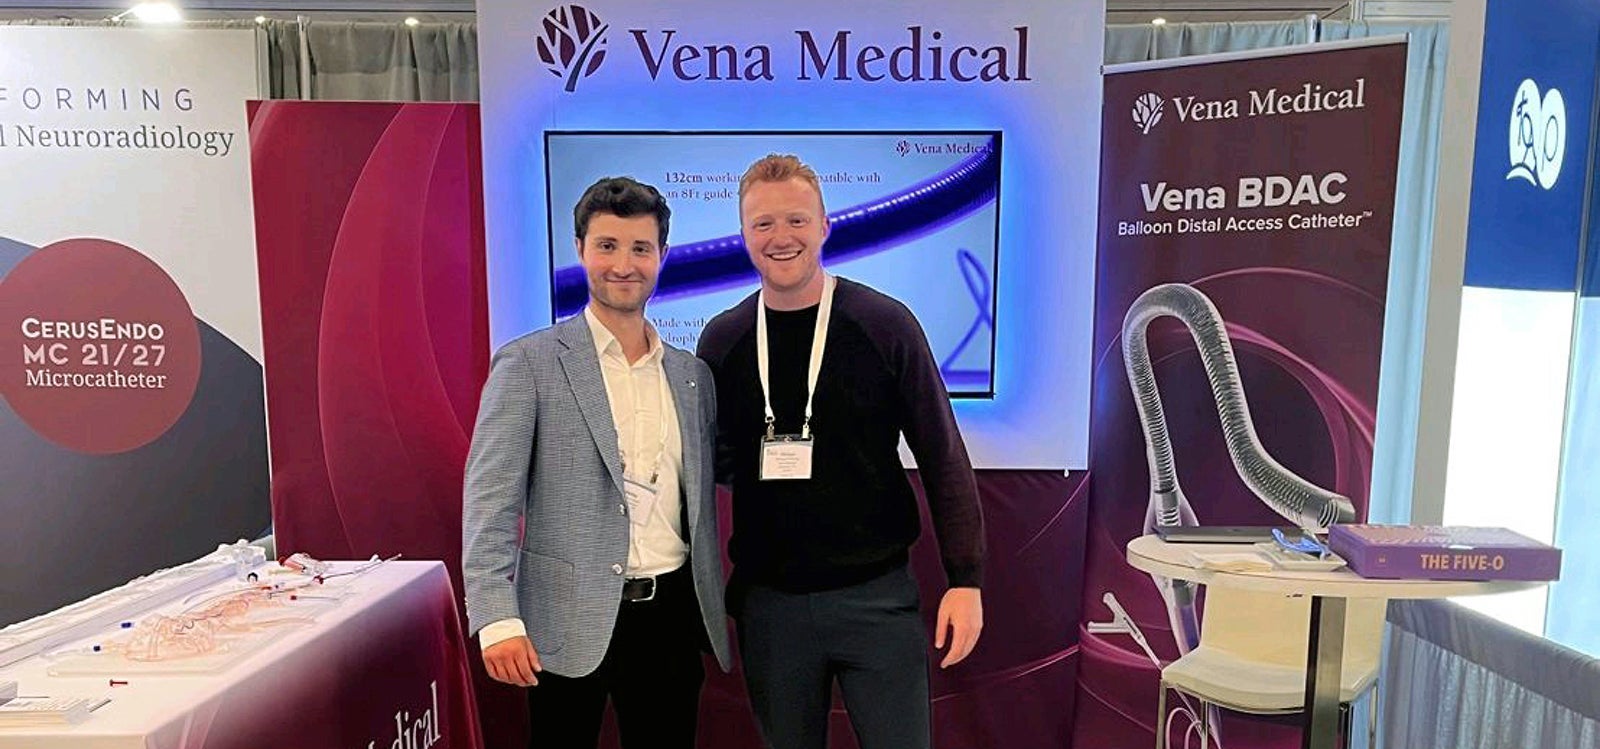 Two males in suits standing in front of the Vena Medical booth.